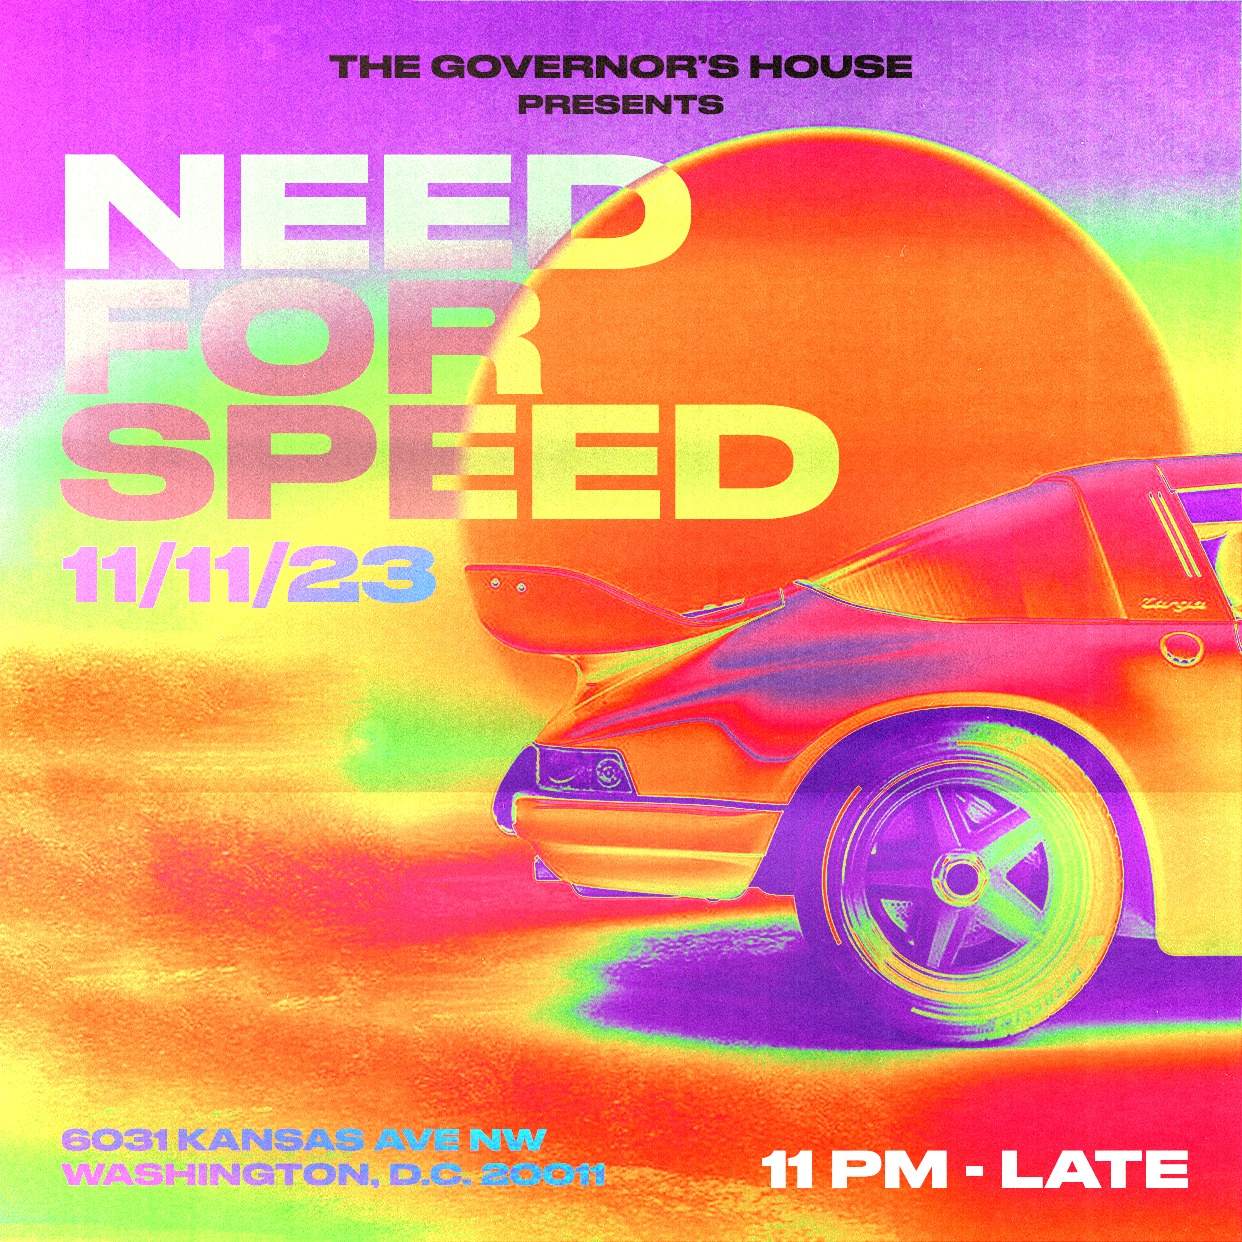 THE GOVERNOR'S HOUSE PRESENTS: NEED FOR SPEED - Página frontal